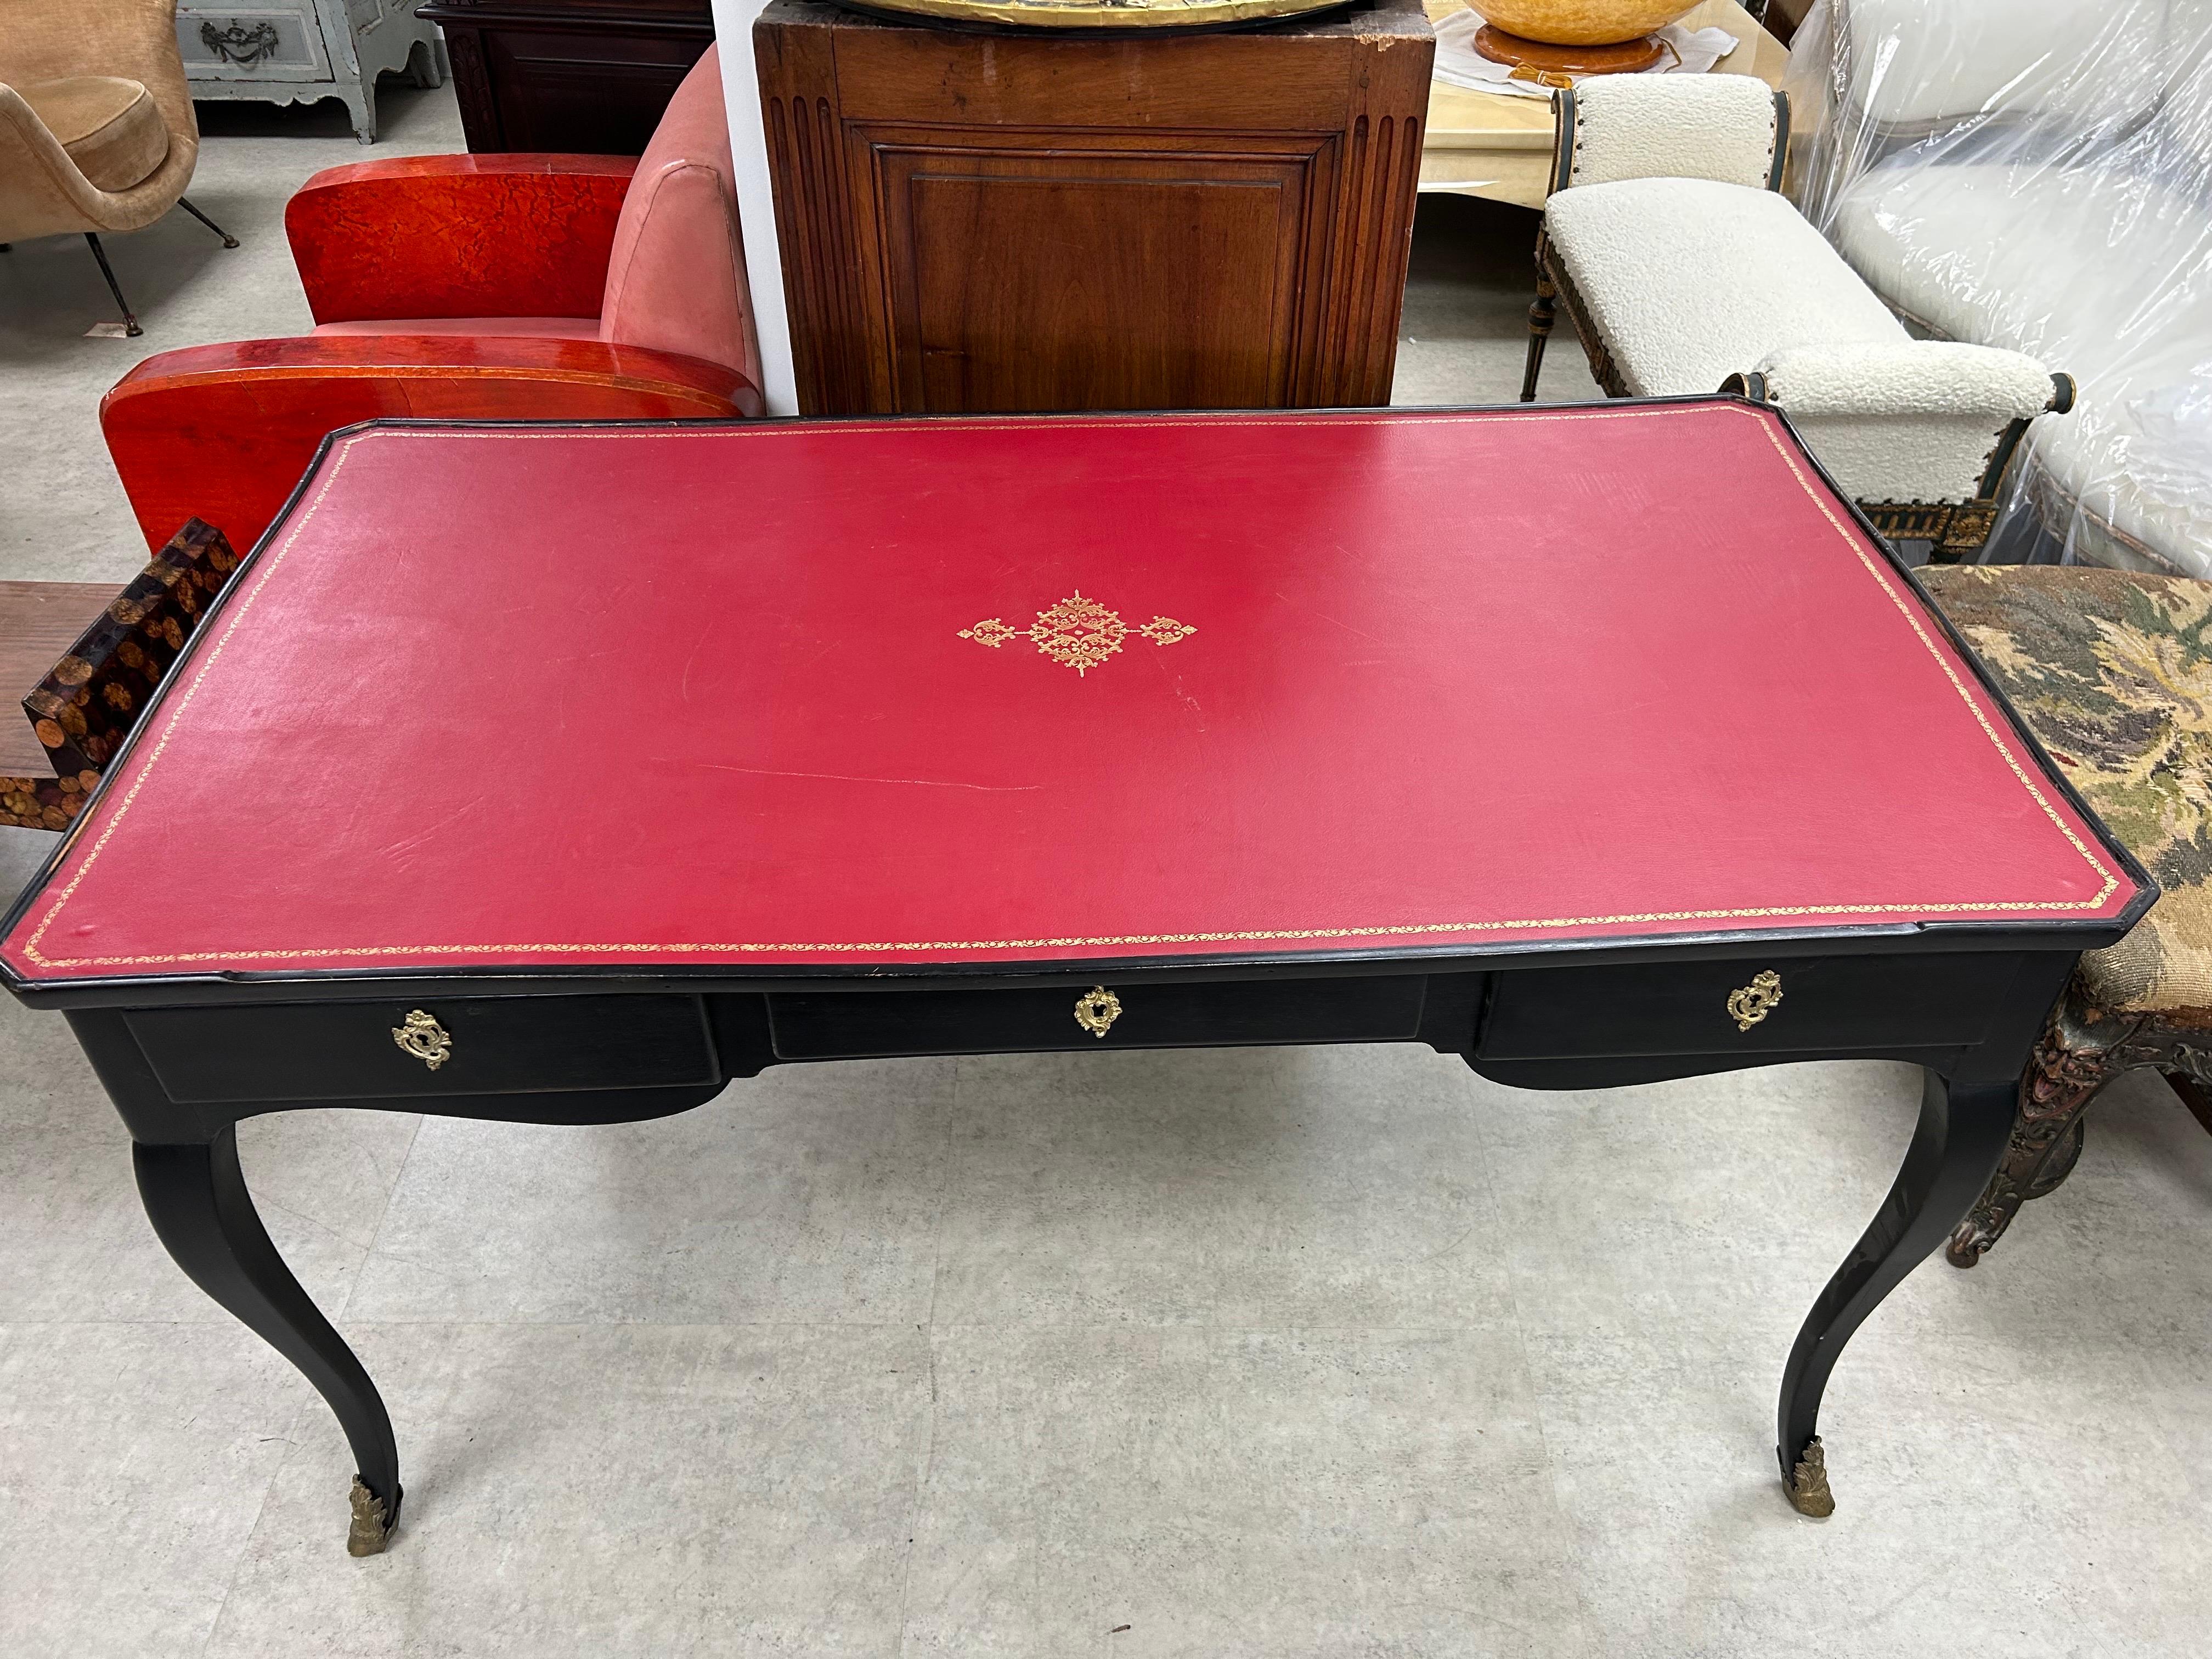  French Maison Jansen Attributed Louis XVI Style Ebonized Desk.
We offer a gorgeous antique French Louis XVI style ebonized desk or bureau plat with a red leather top embossed with gilt, three drawers and beautiful bronze sabots.
This desk has the